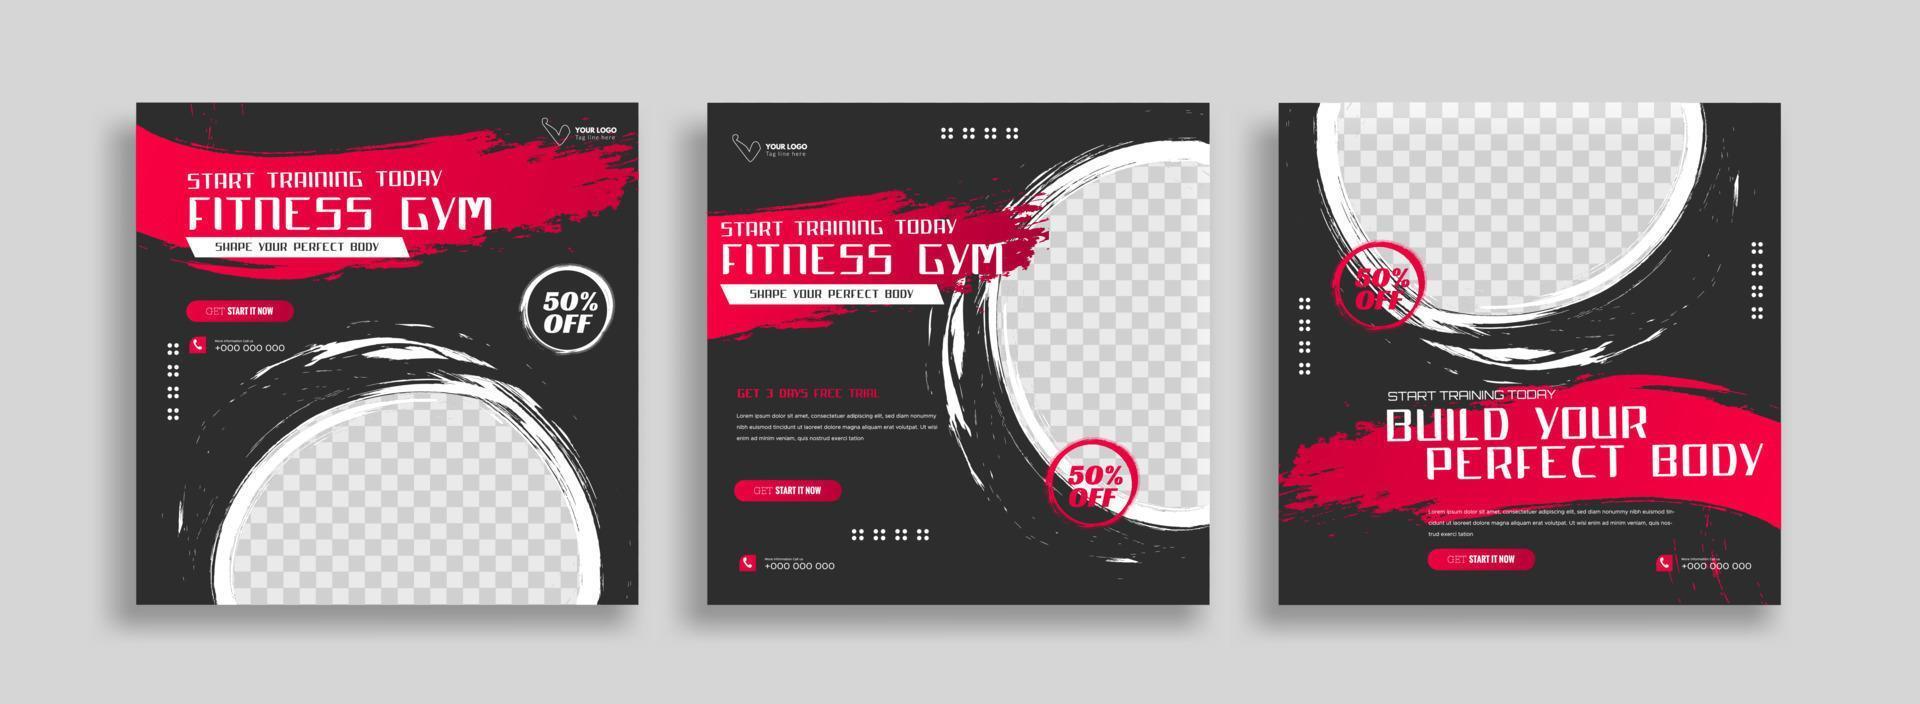 posts on social media vector illustration. Stylish graphics templates posts. dynamic abstractions typography photo. modern art paint and brush stains, fitness subjects gym. design frame post Template